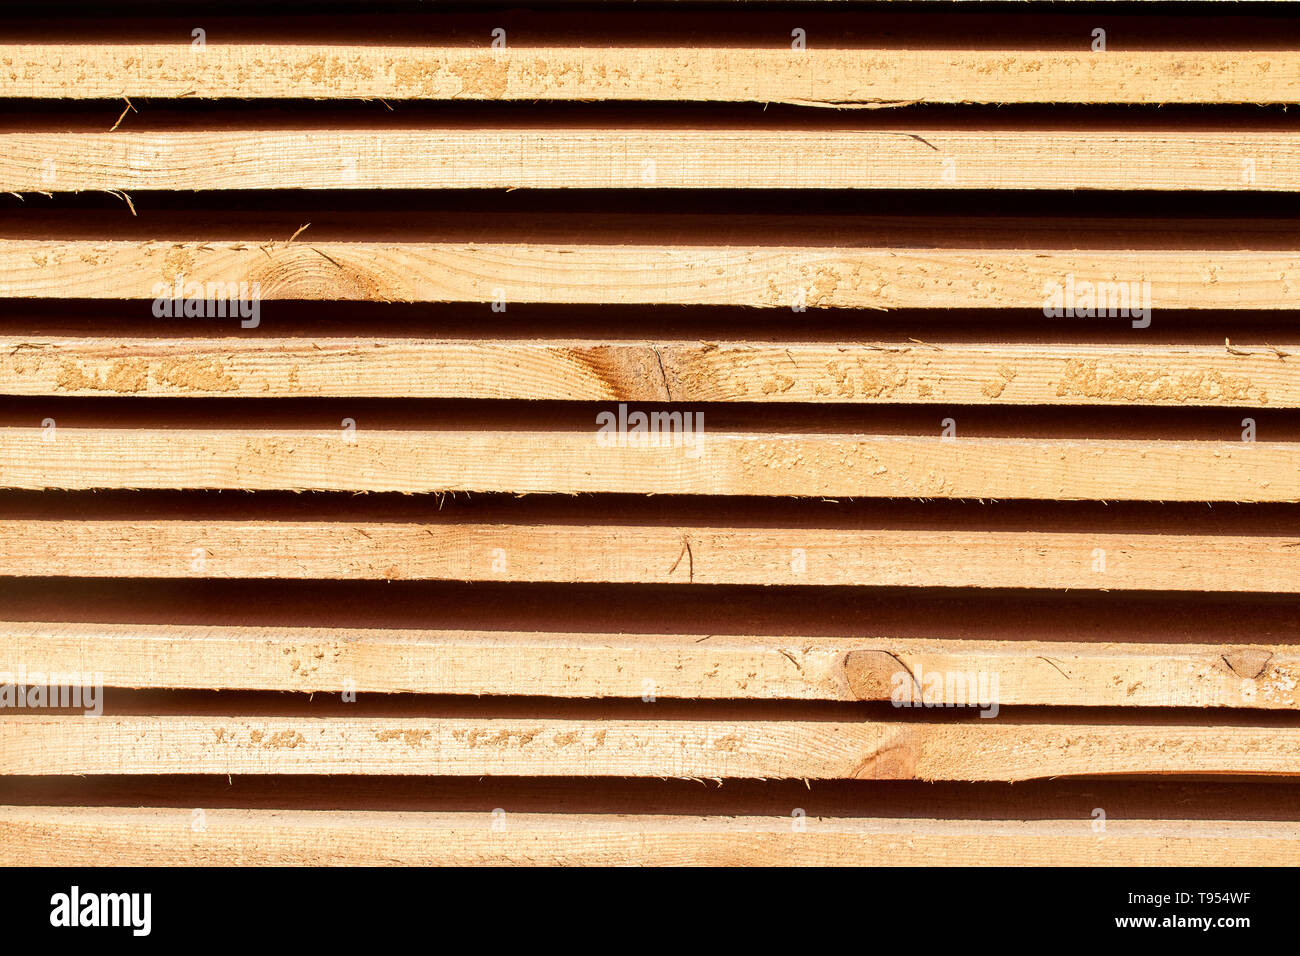 wood beams background with a clear tree structure Stock Photo